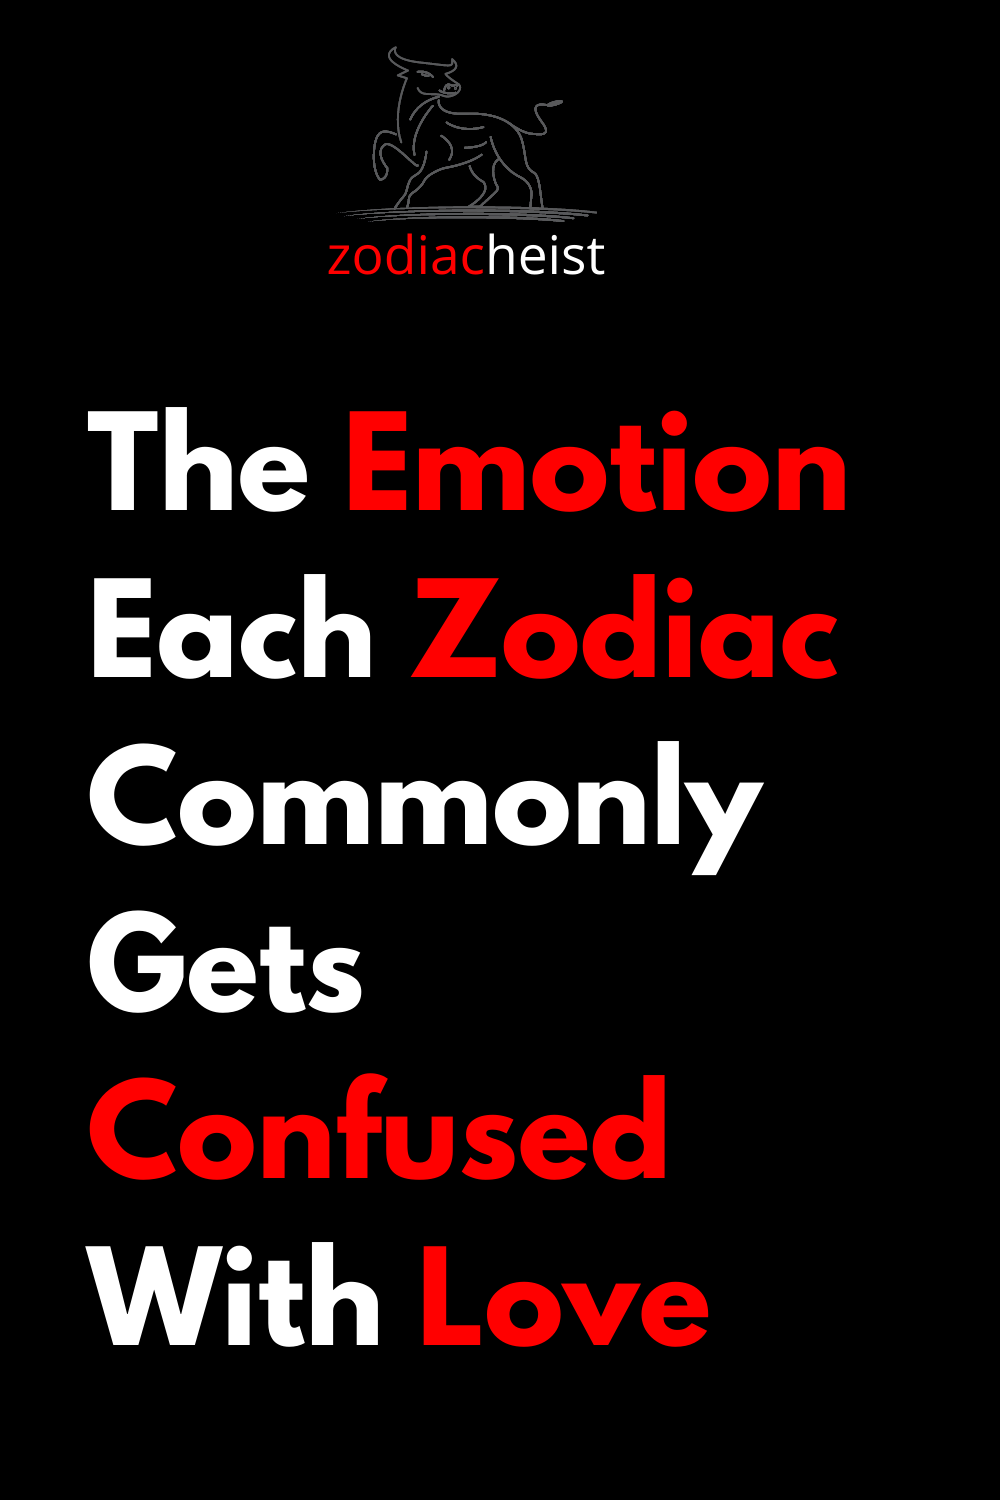 The Emotion Each Zodiac Commonly Gets Confused With Love